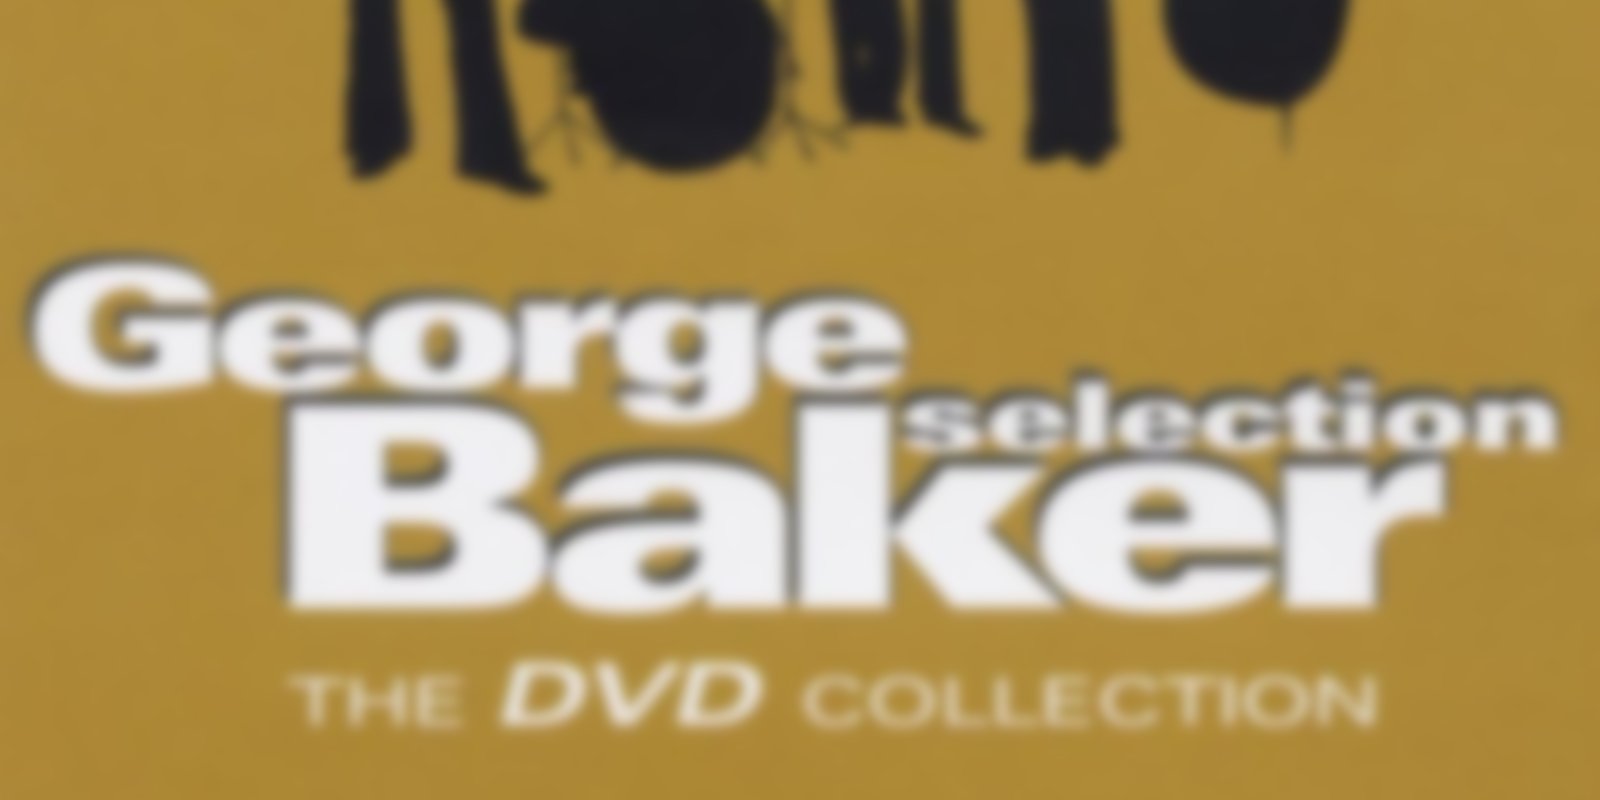 George Baker Selection - The DVD Collection